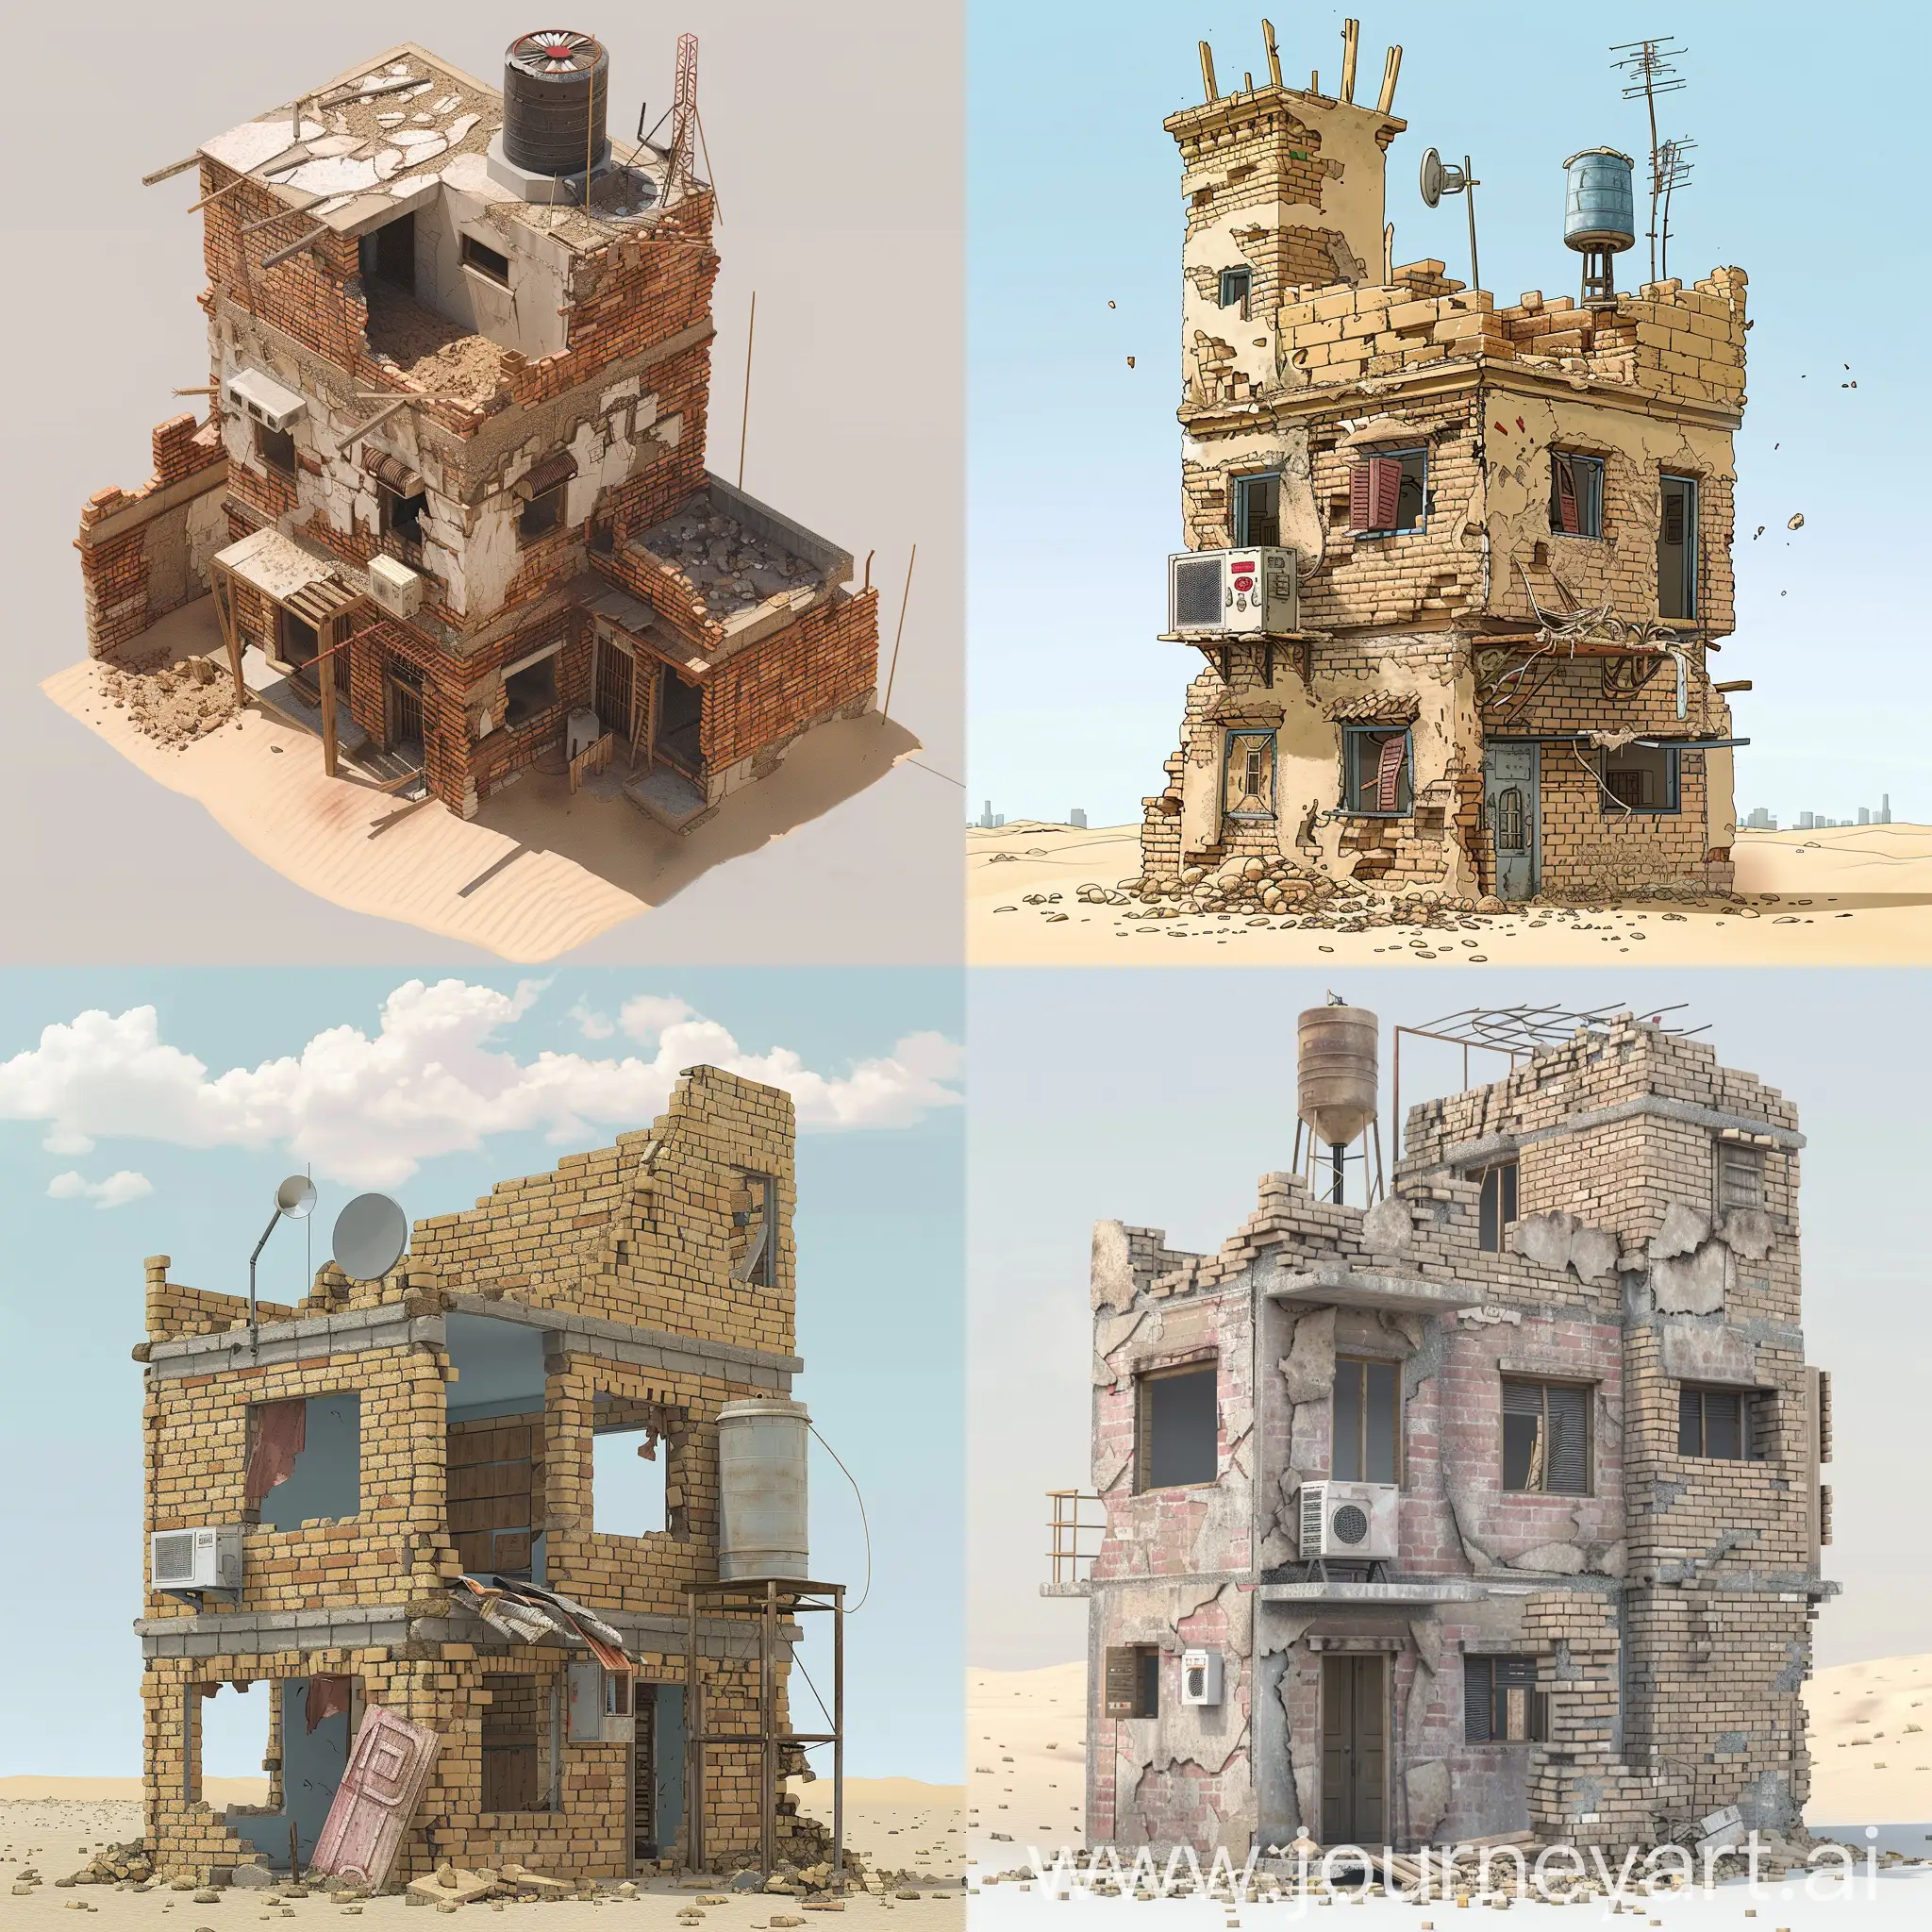 A small, unfinished, roofless, shabby half-abandoned 3-story brick residential village house, partially destroyed, with air conditioning and water tower, located in a dry climate, in a remote part of the desert, in a poor village near south Cairo in 2D.